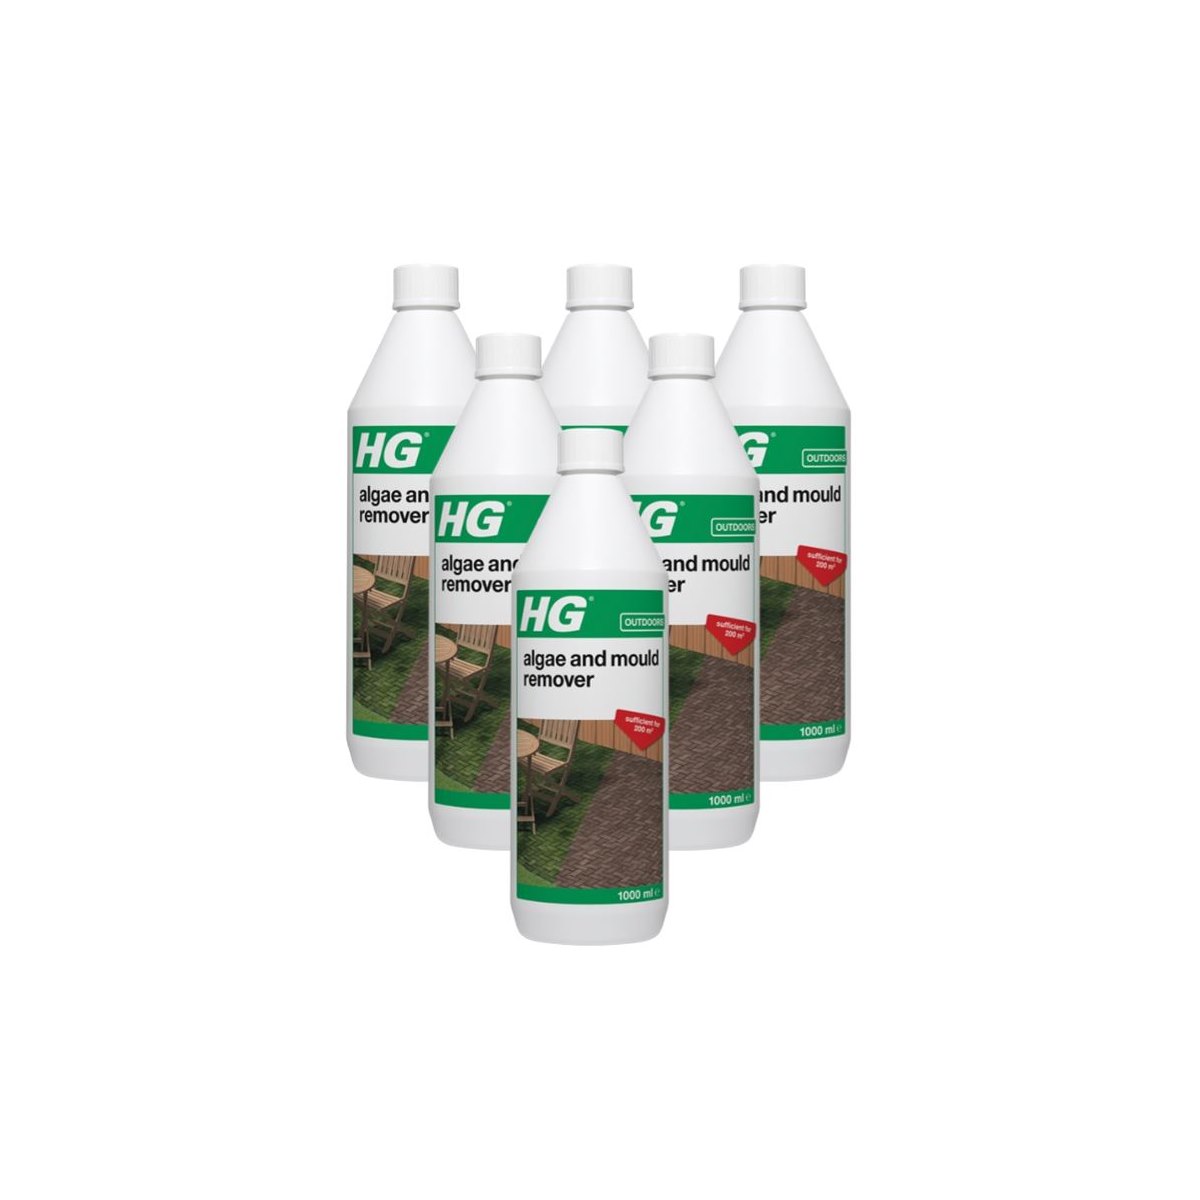 Case of 6 x HG Algae and Mould Remover 1 Litre